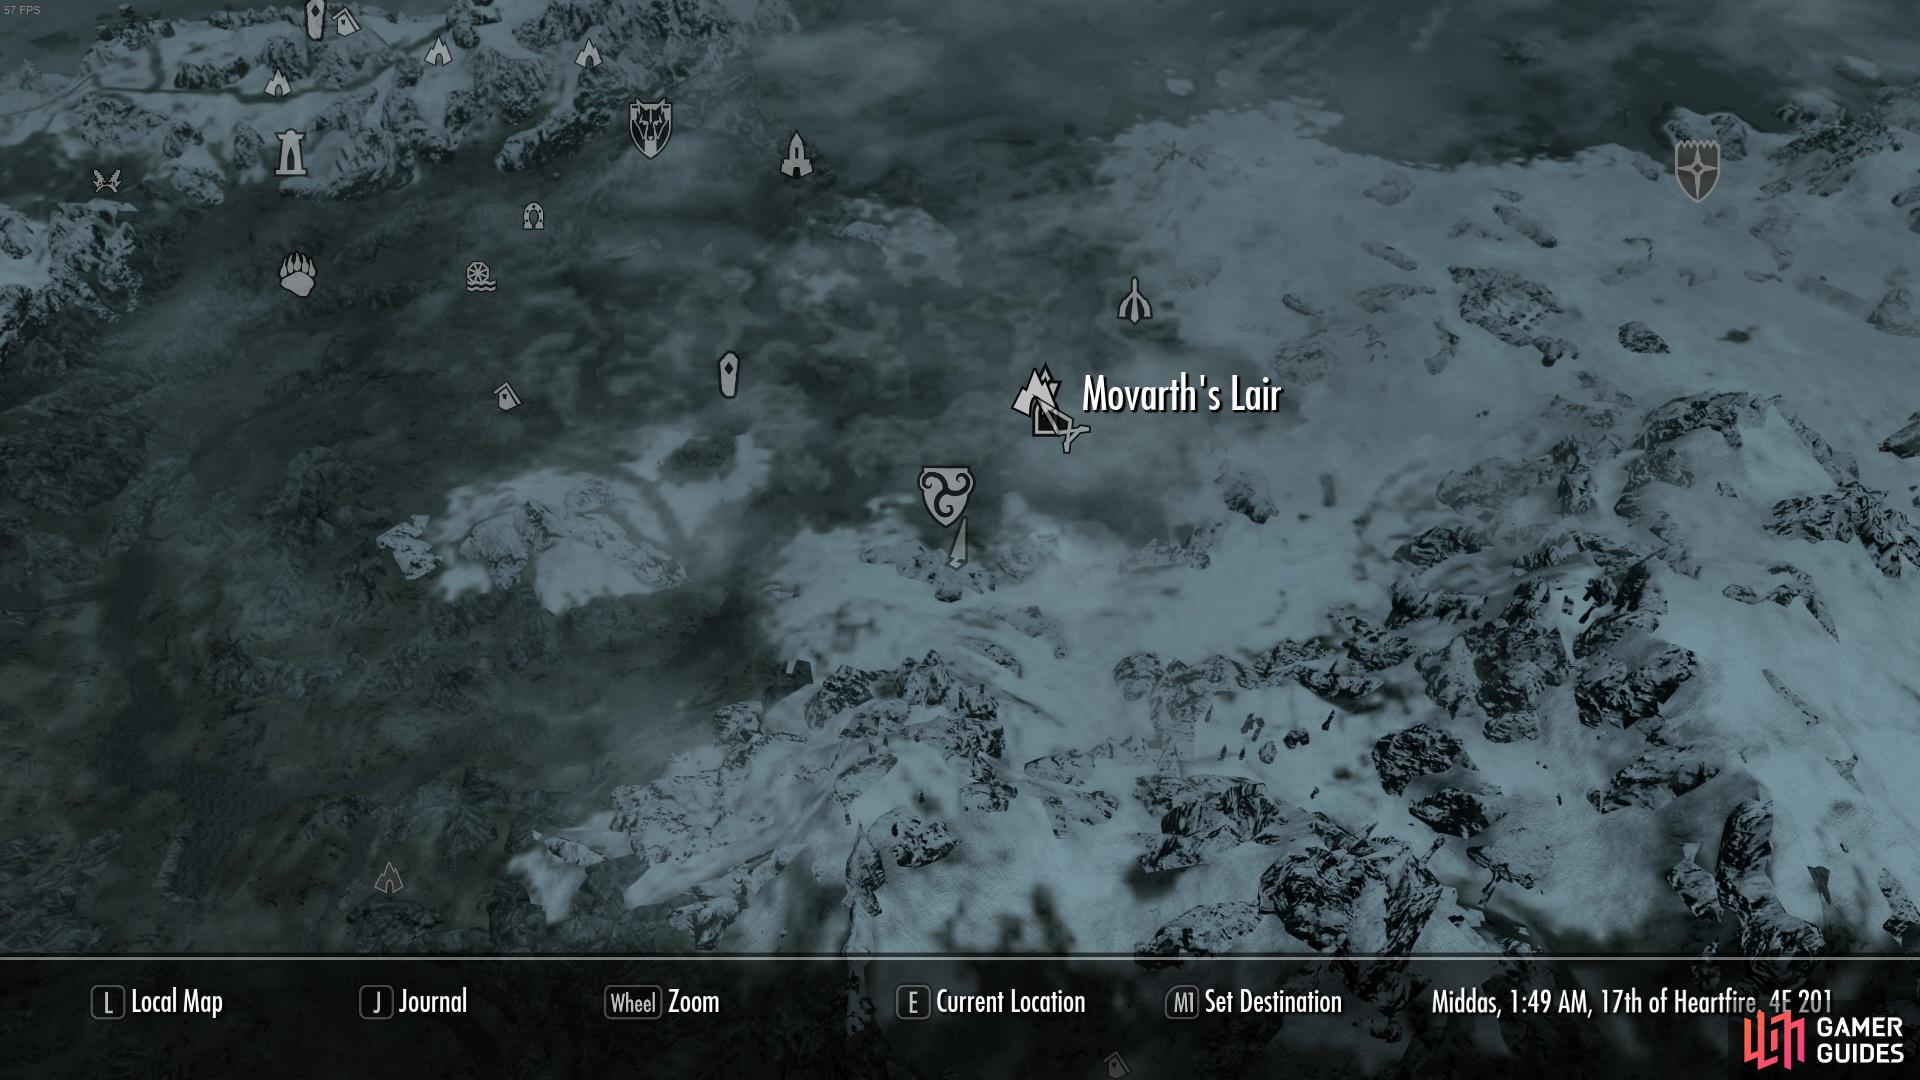 Movarth's Lair is found northeast of Morthal. 